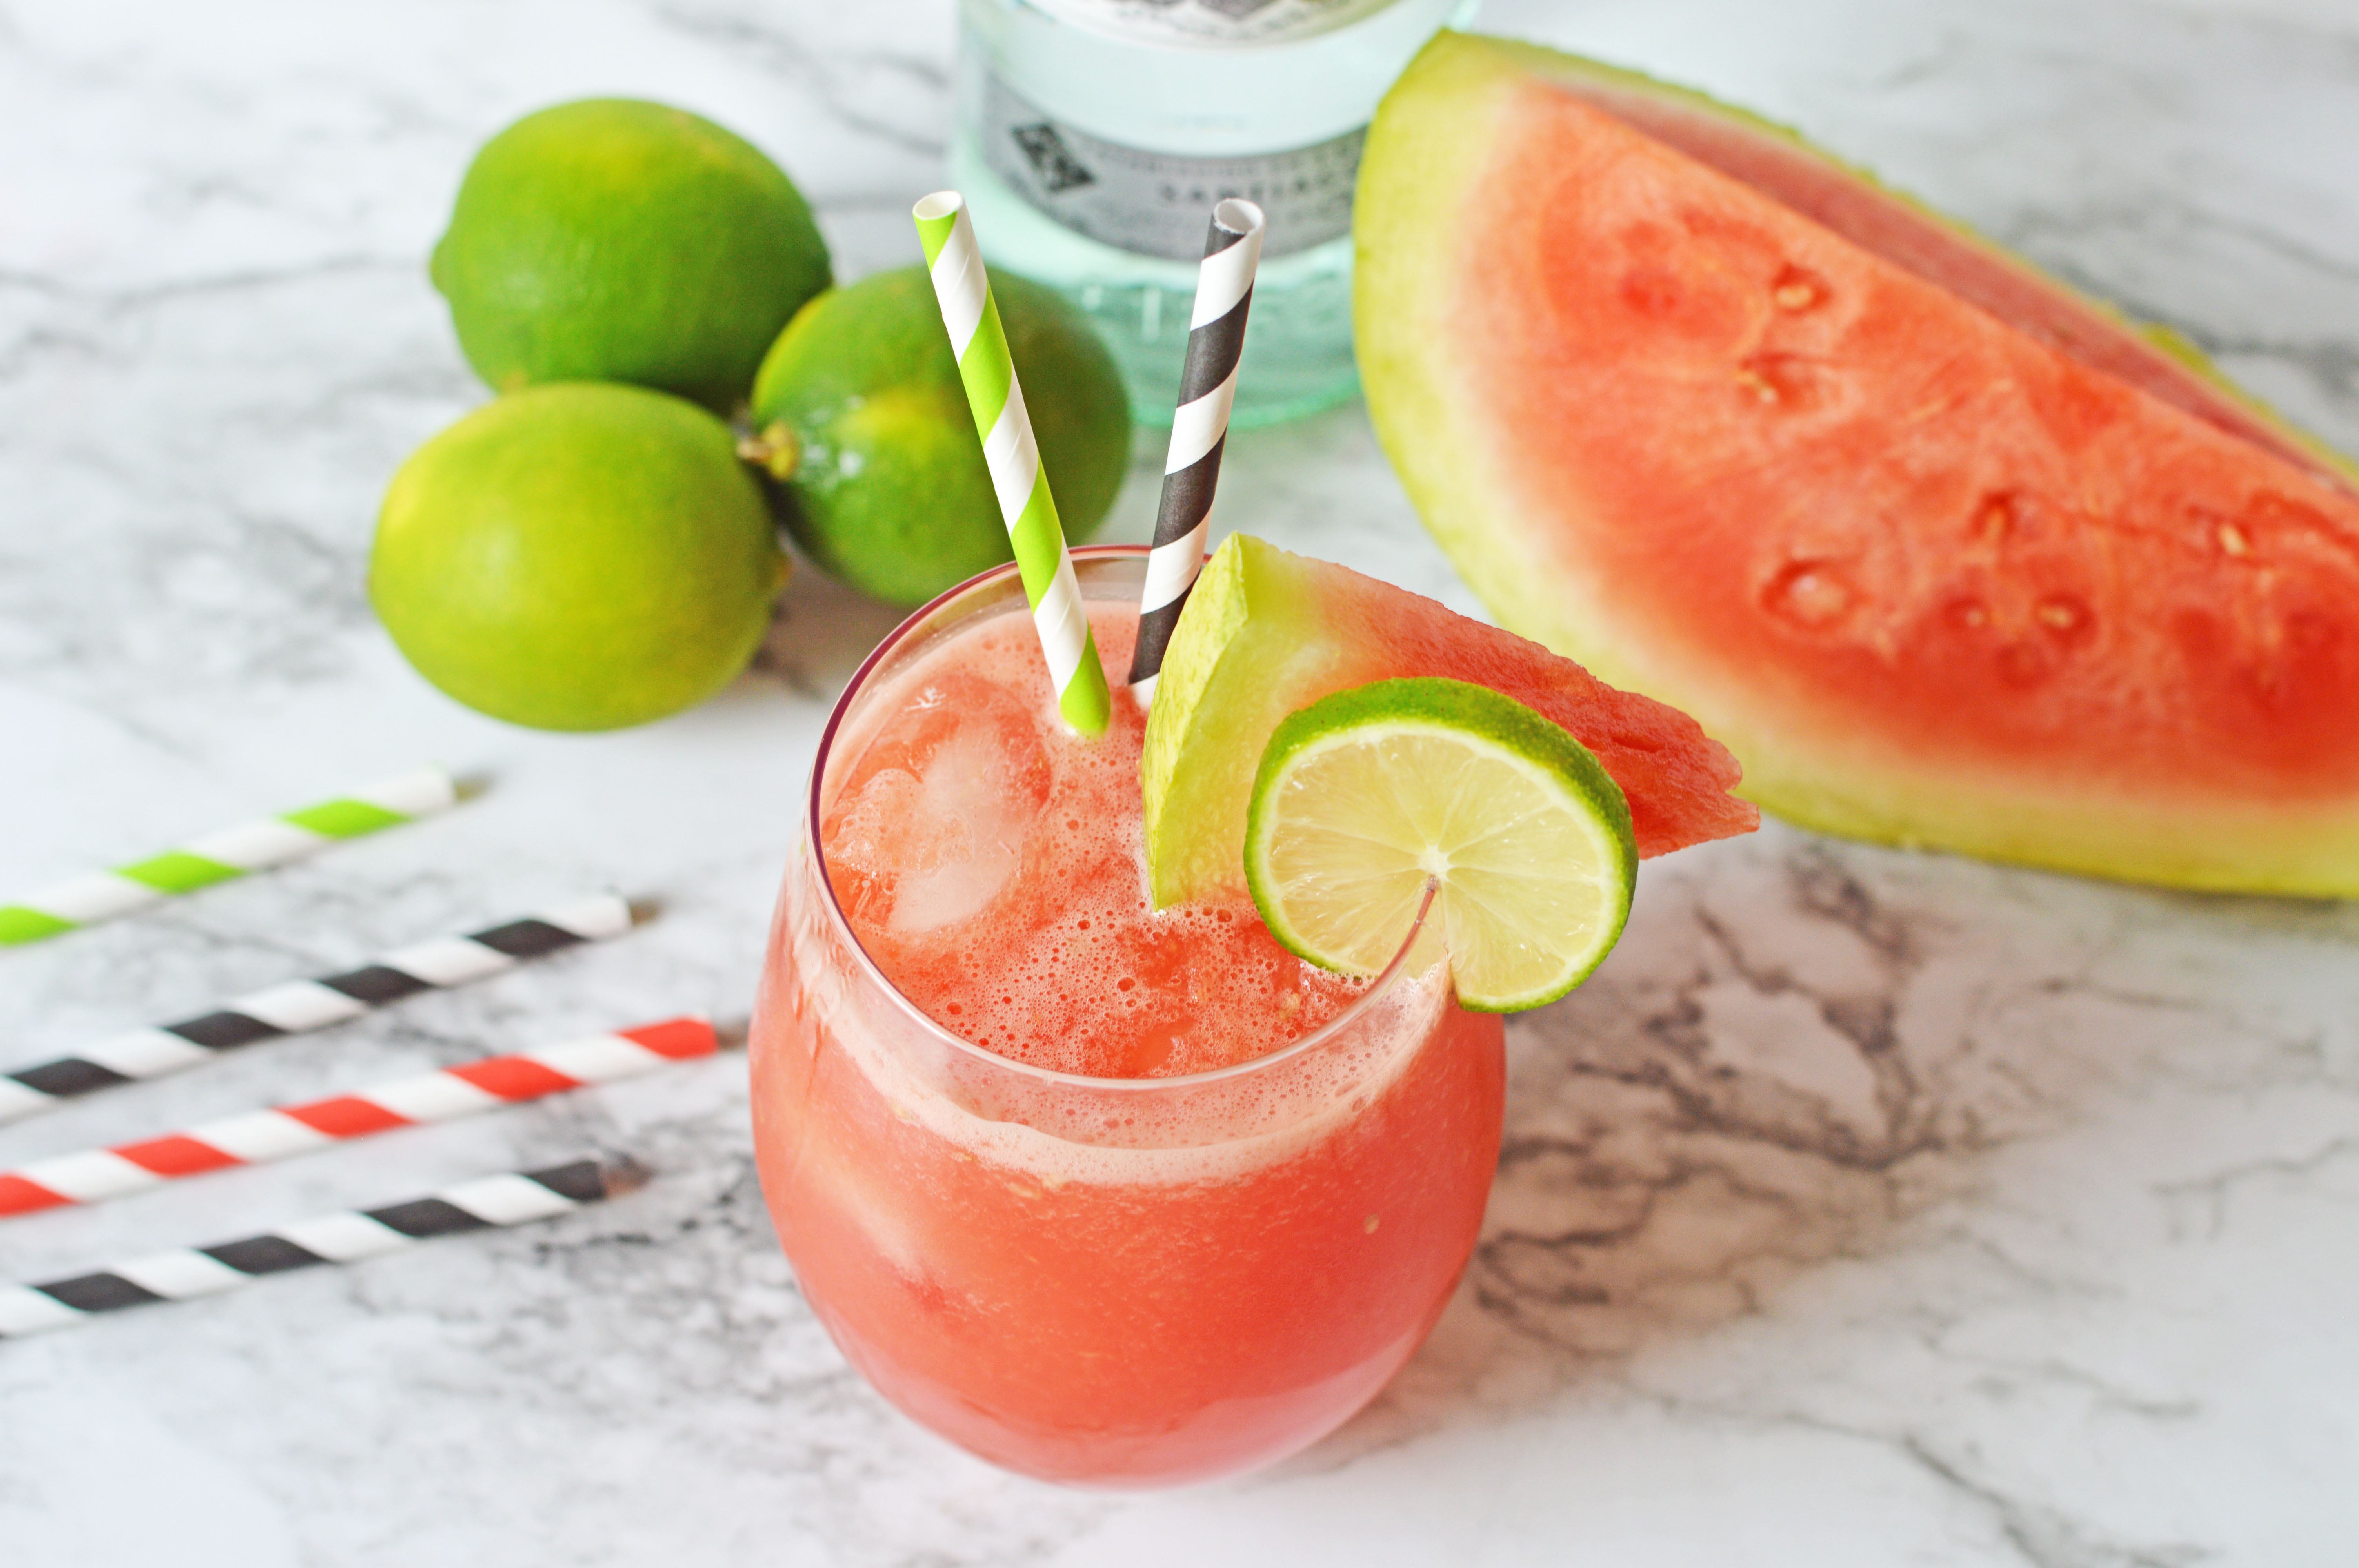 Glass on a worktop with a pink watermelon rum punch in it with two stripy straws in the glass and a slice of lime and watermelon on the rim of the glass. There is a bottle of Bacardi rum in the background next to limes and slices of watermelon.